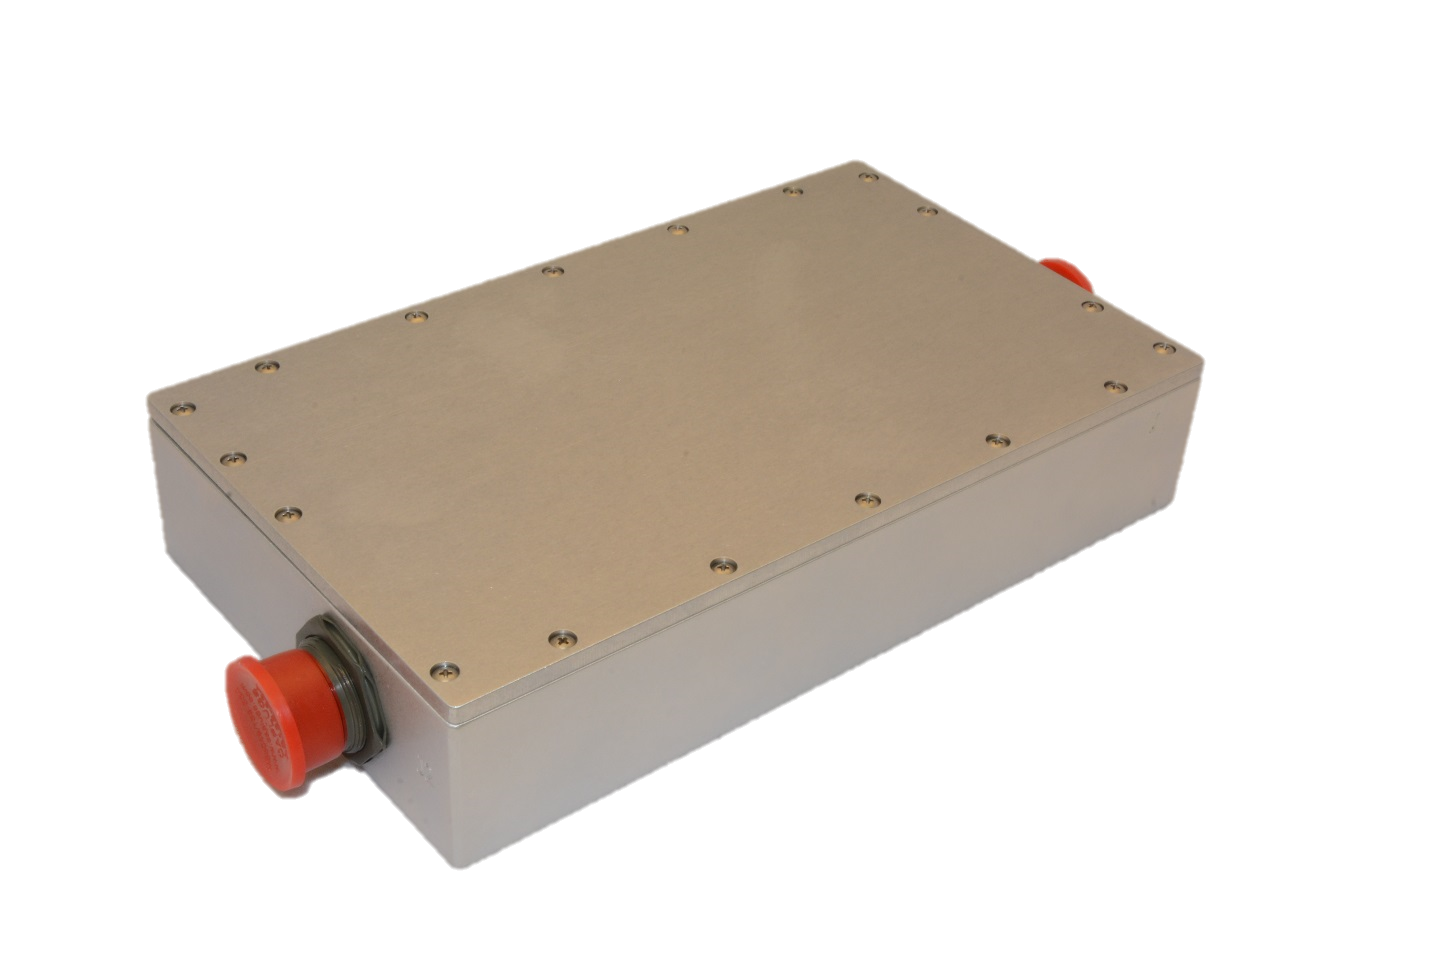 SW2511005 DC-DC Power Supply Product Image